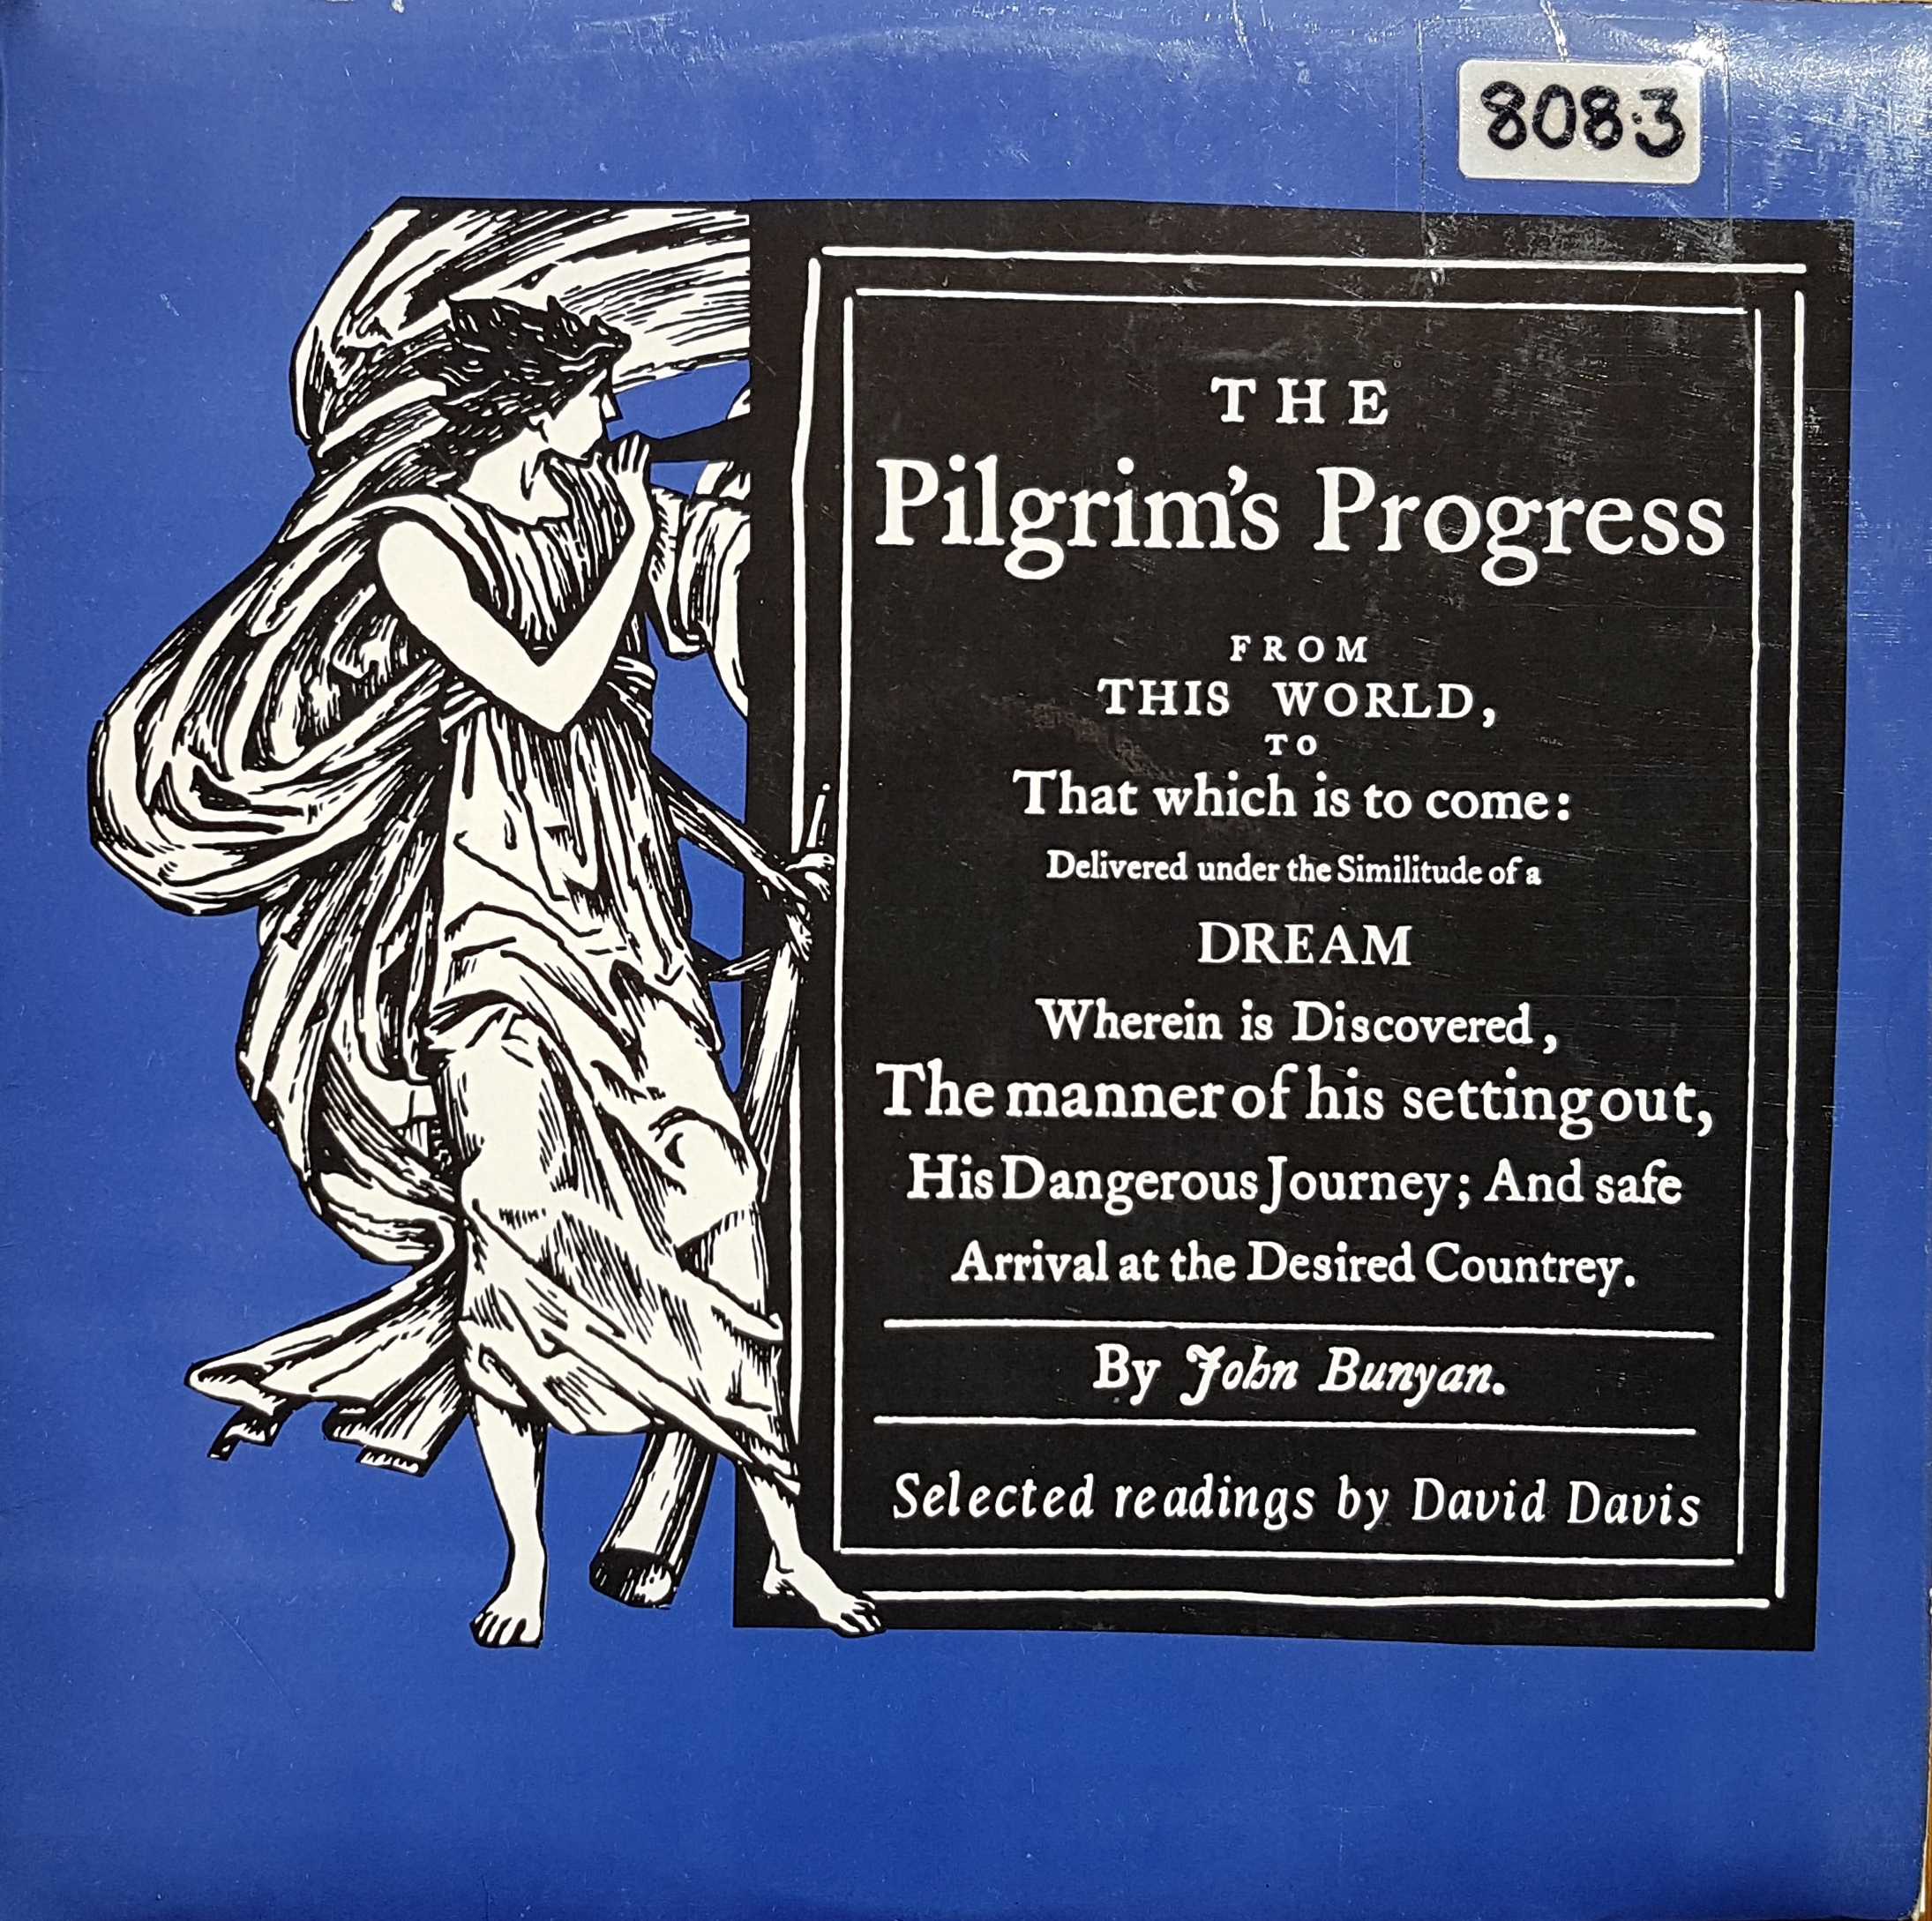 Picture of RESR 1 Pilgrim's Progress by artist John Bunyan / David Davis from the BBC albums - Records and Tapes library